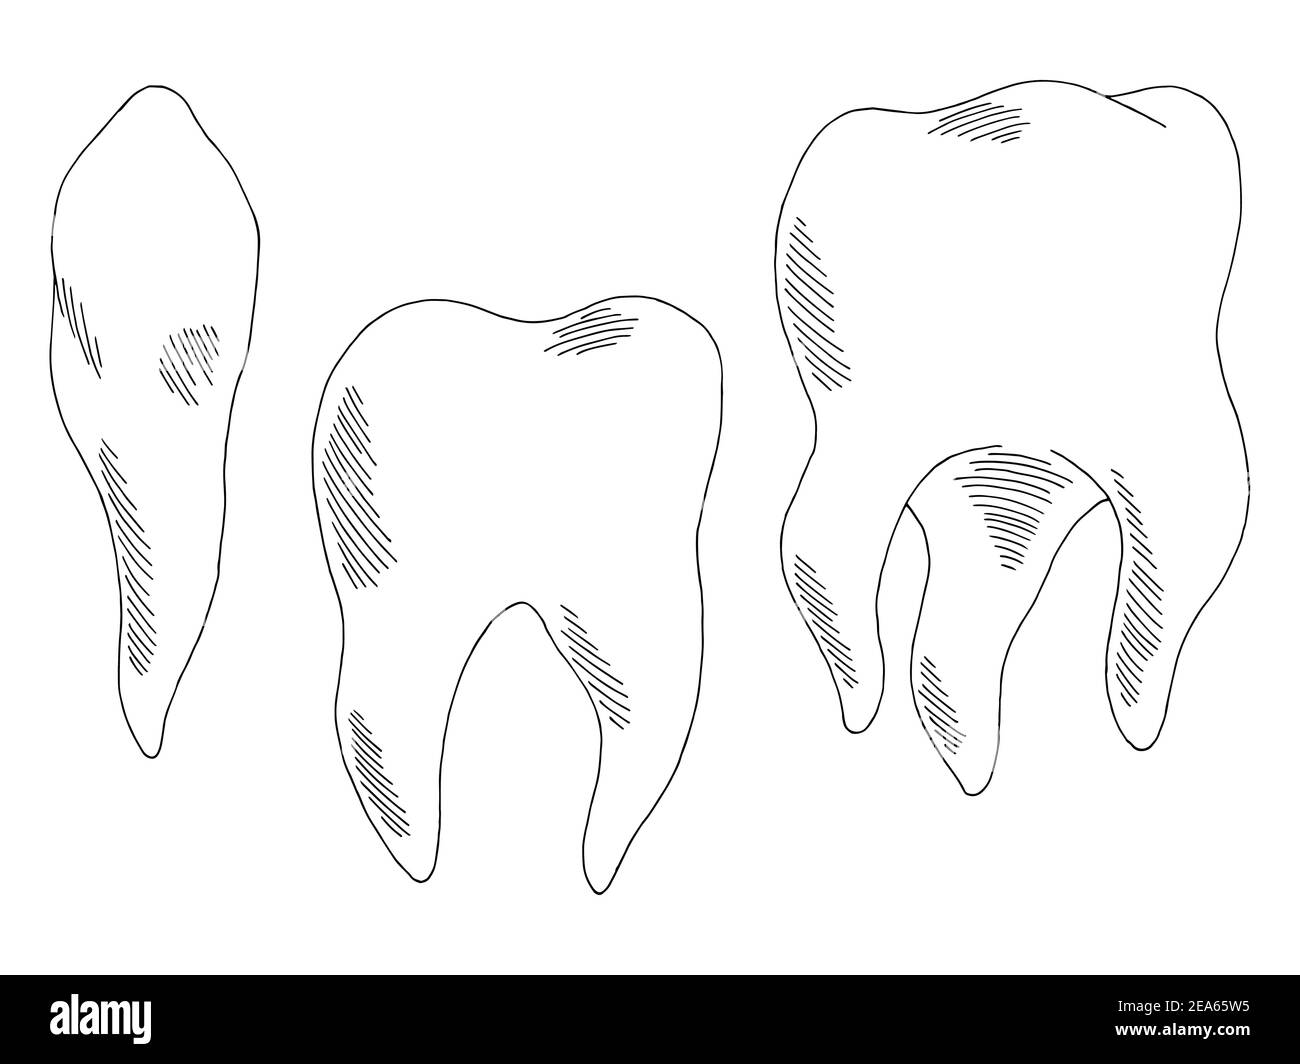 Tooth set graphic black white isolated sketch illustration vector Stock Vector